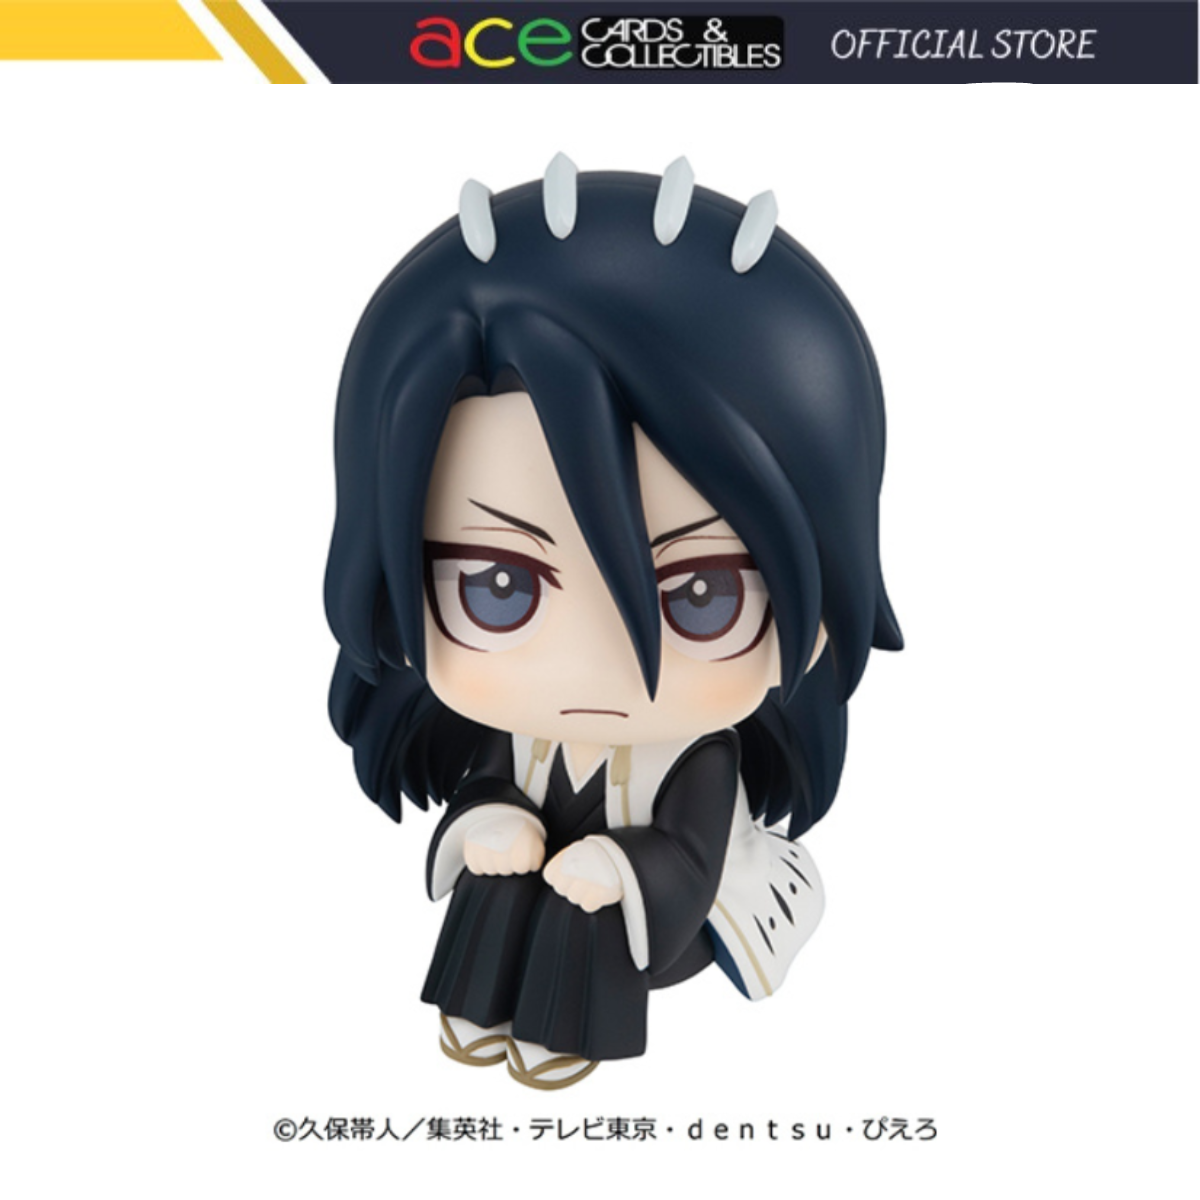 Bleach: Thousand-Year Blood War -Look Up Series- &quot;Byakuya Kuchiki&quot;-MegaHouse-Ace Cards &amp; Collectibles